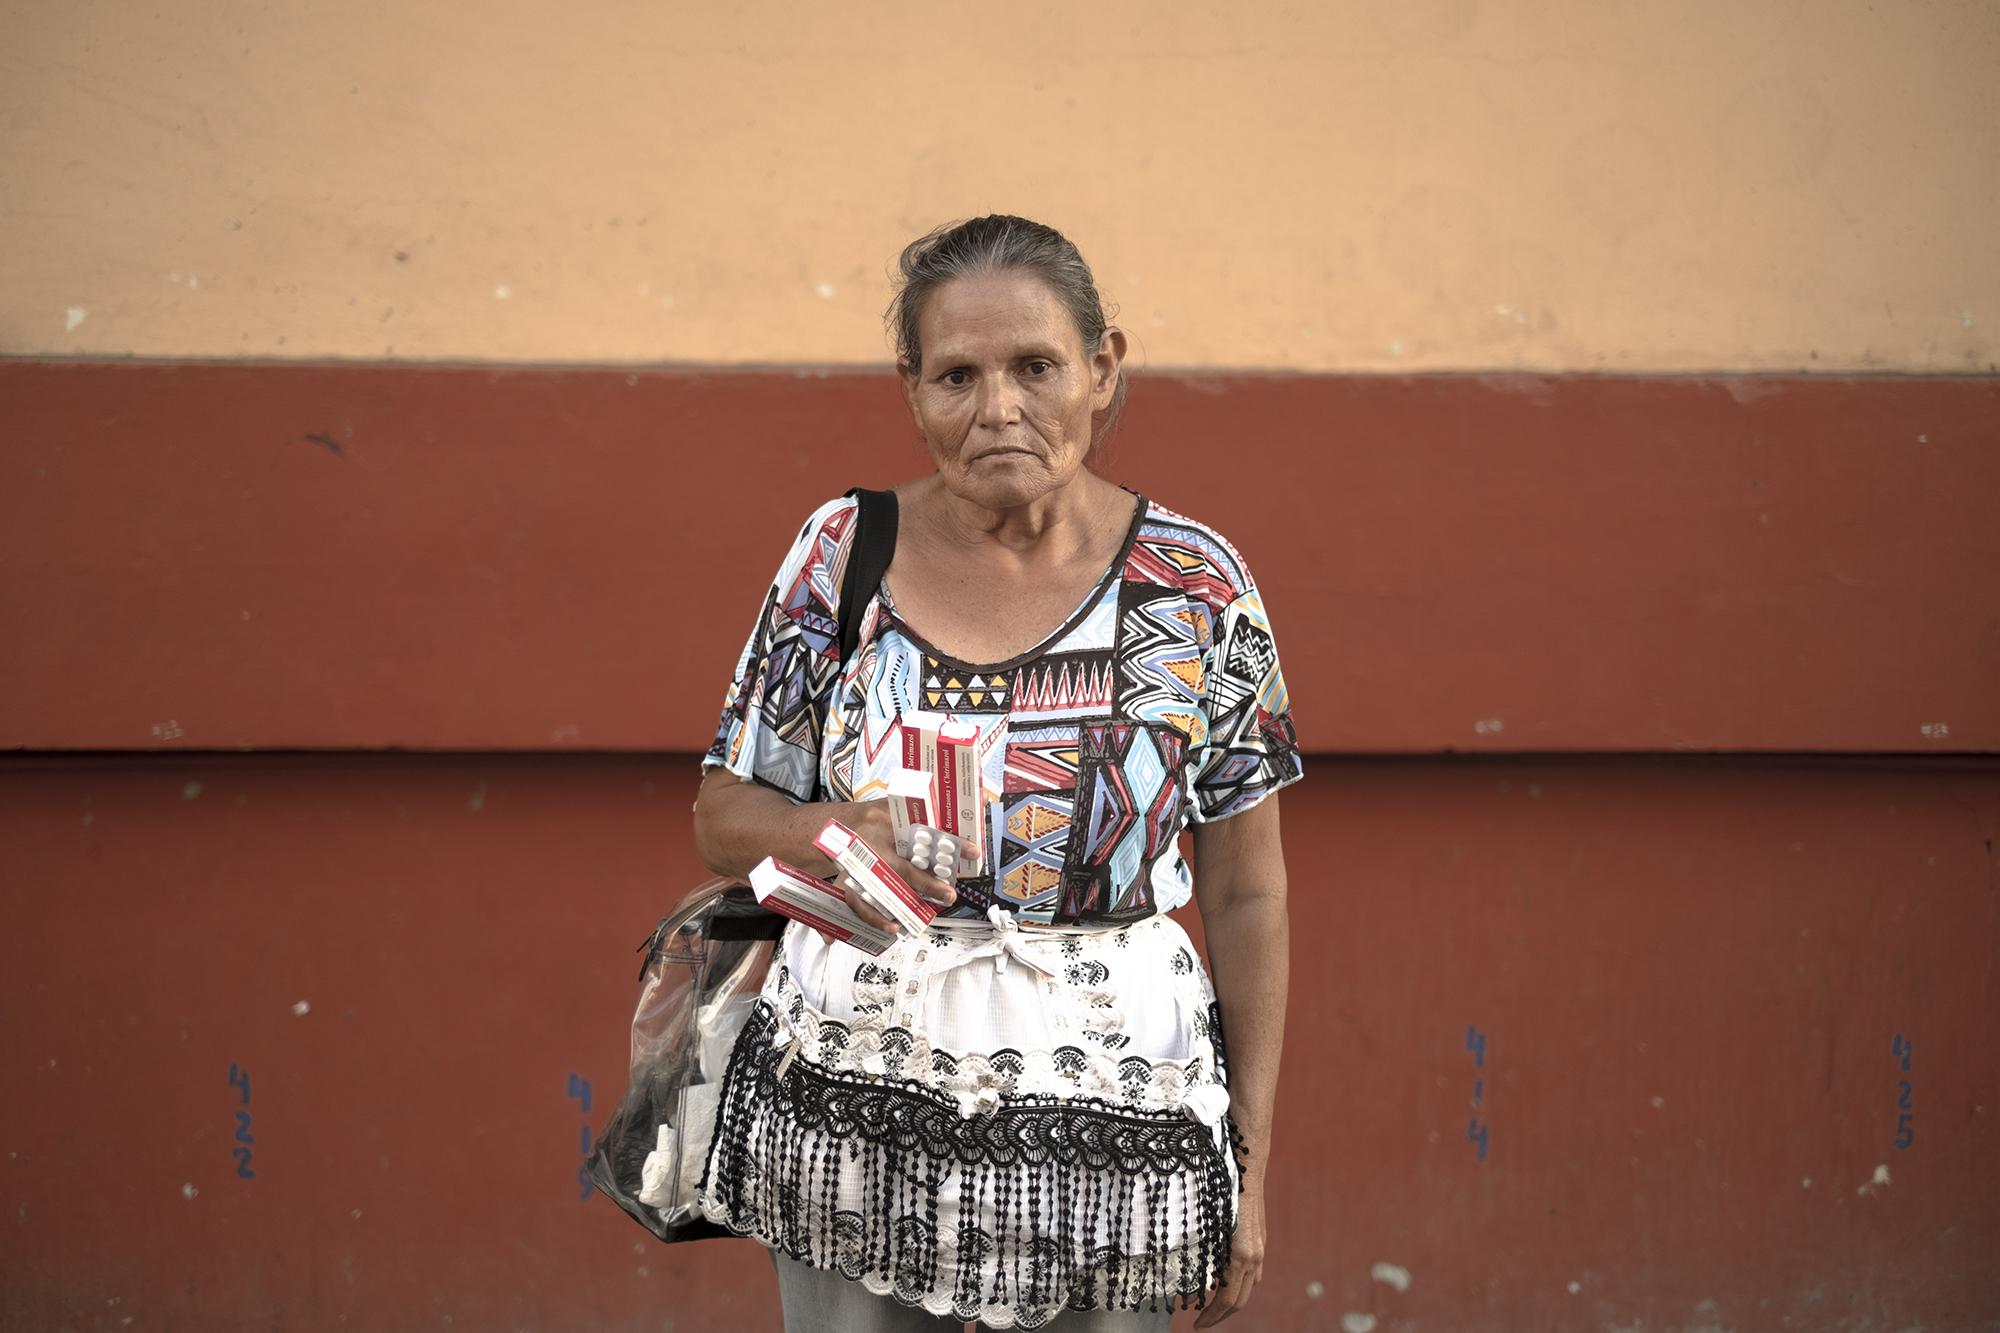 Marta Mejía, 64, lives in Apopa and sells medicine on foot. “I haven’t sold anything here today. You roll the dice on a meal every day,” she said. “Can you imagine what would happen to us if we didn’t go out and sell? They would let us die, because we have no other source of income.”